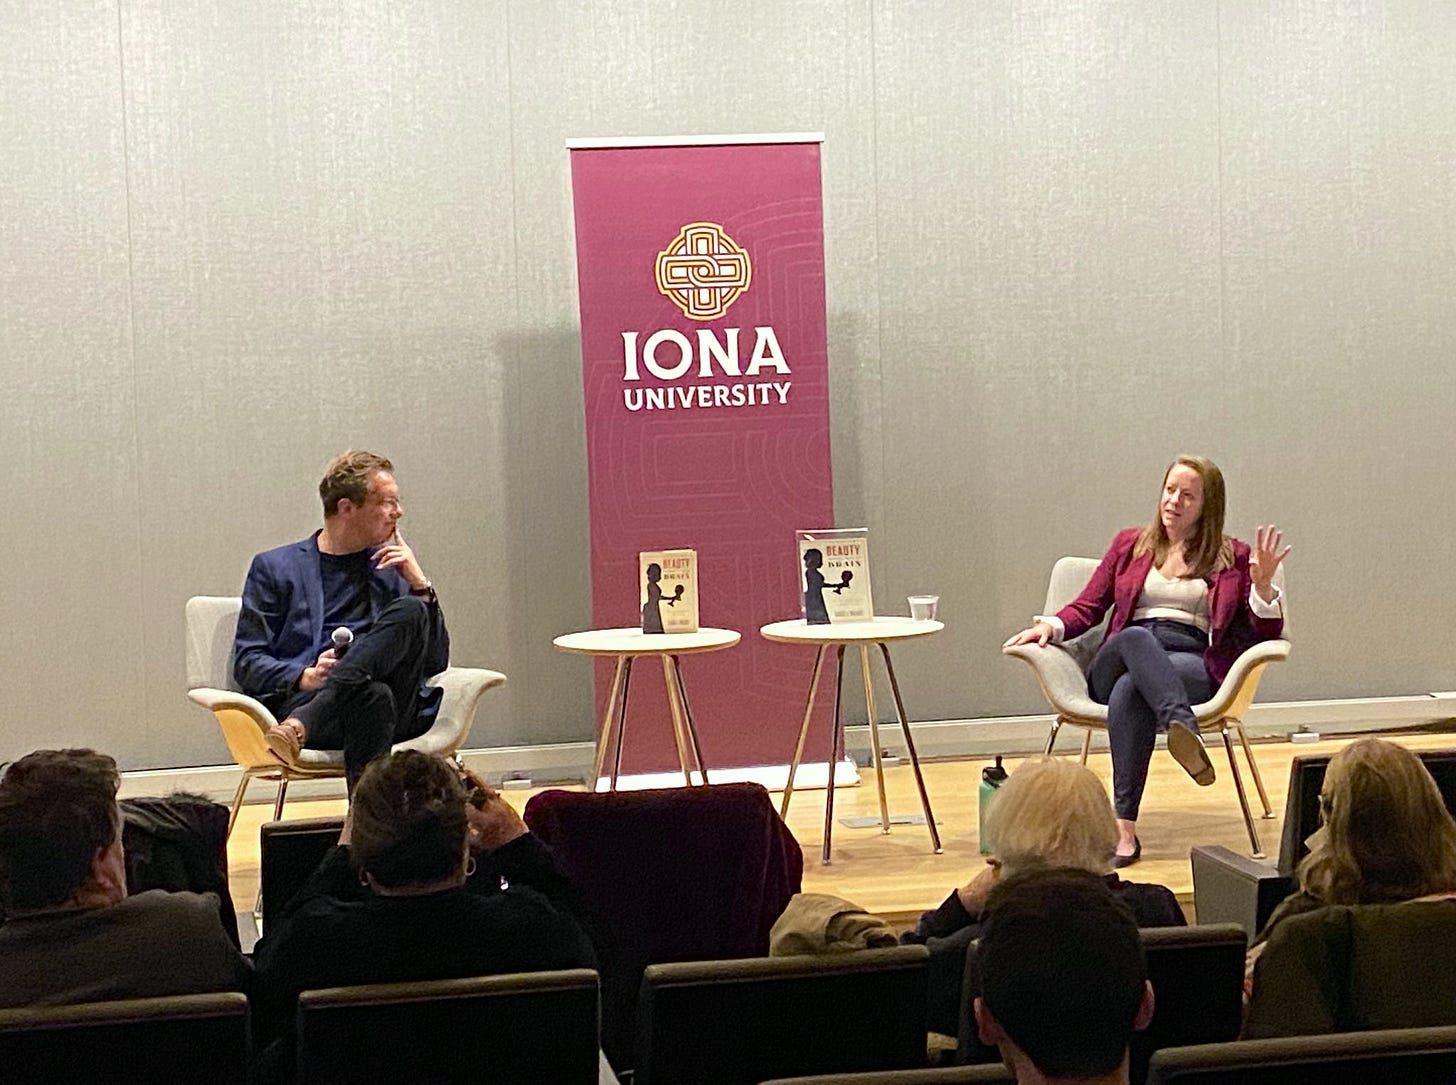 Two speakers on a stage with an Iona banner